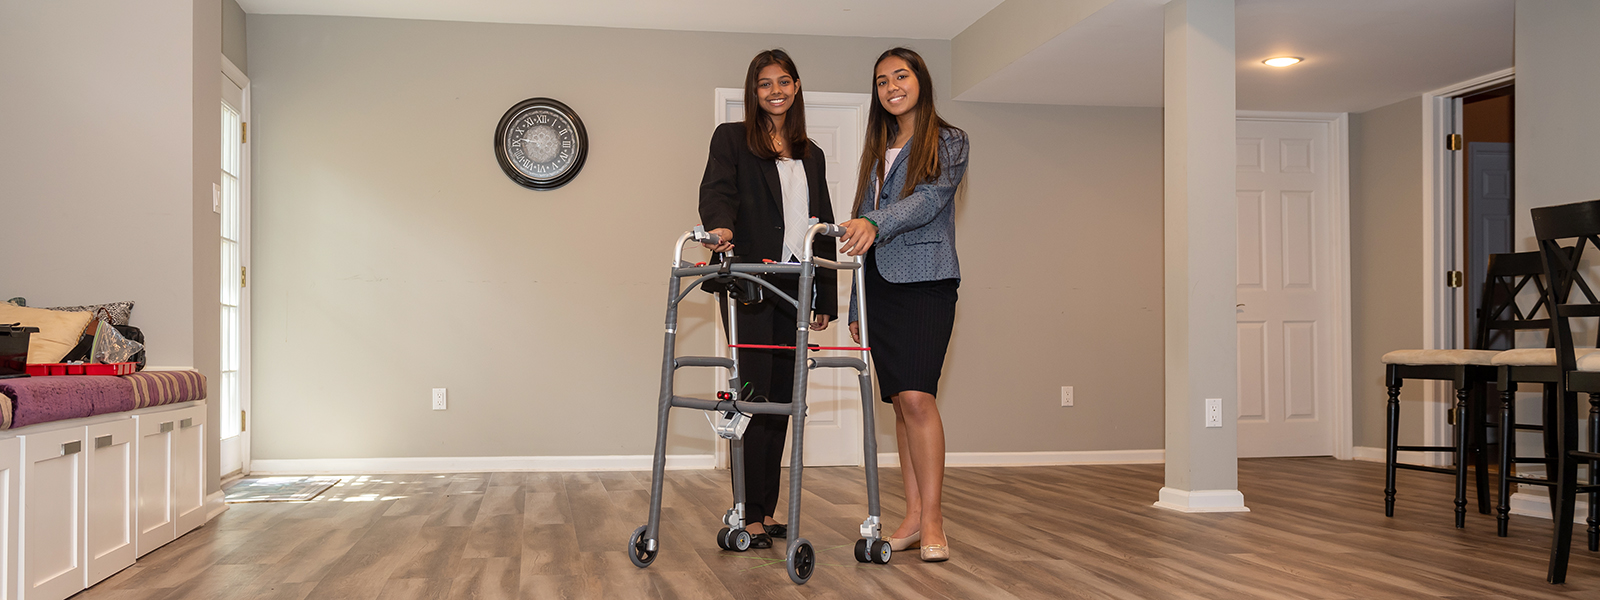 Kaavya Karthikeyan and Akanksha Tibrewala stand in front of AutoTrem, an automatic walker they designed to assist people with mobility issues.